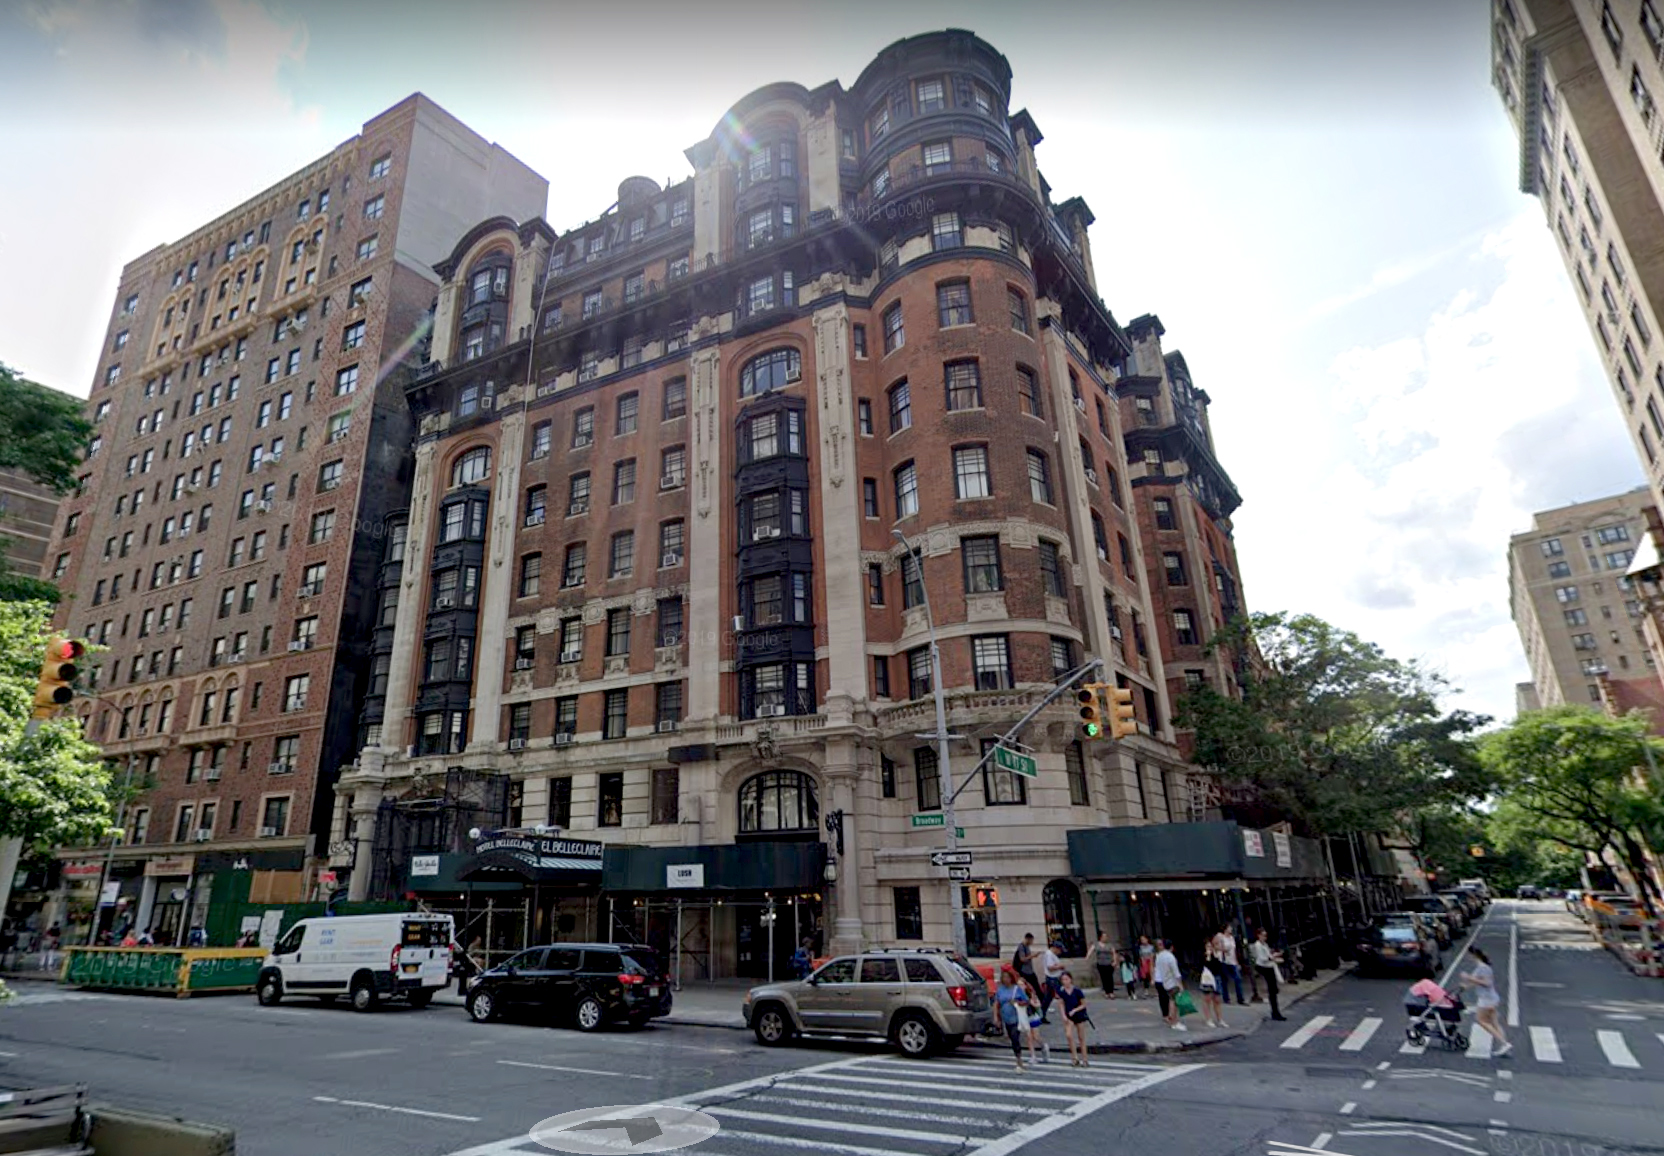 PHOTO: The Hotel Belleclaire in New York is seen here.